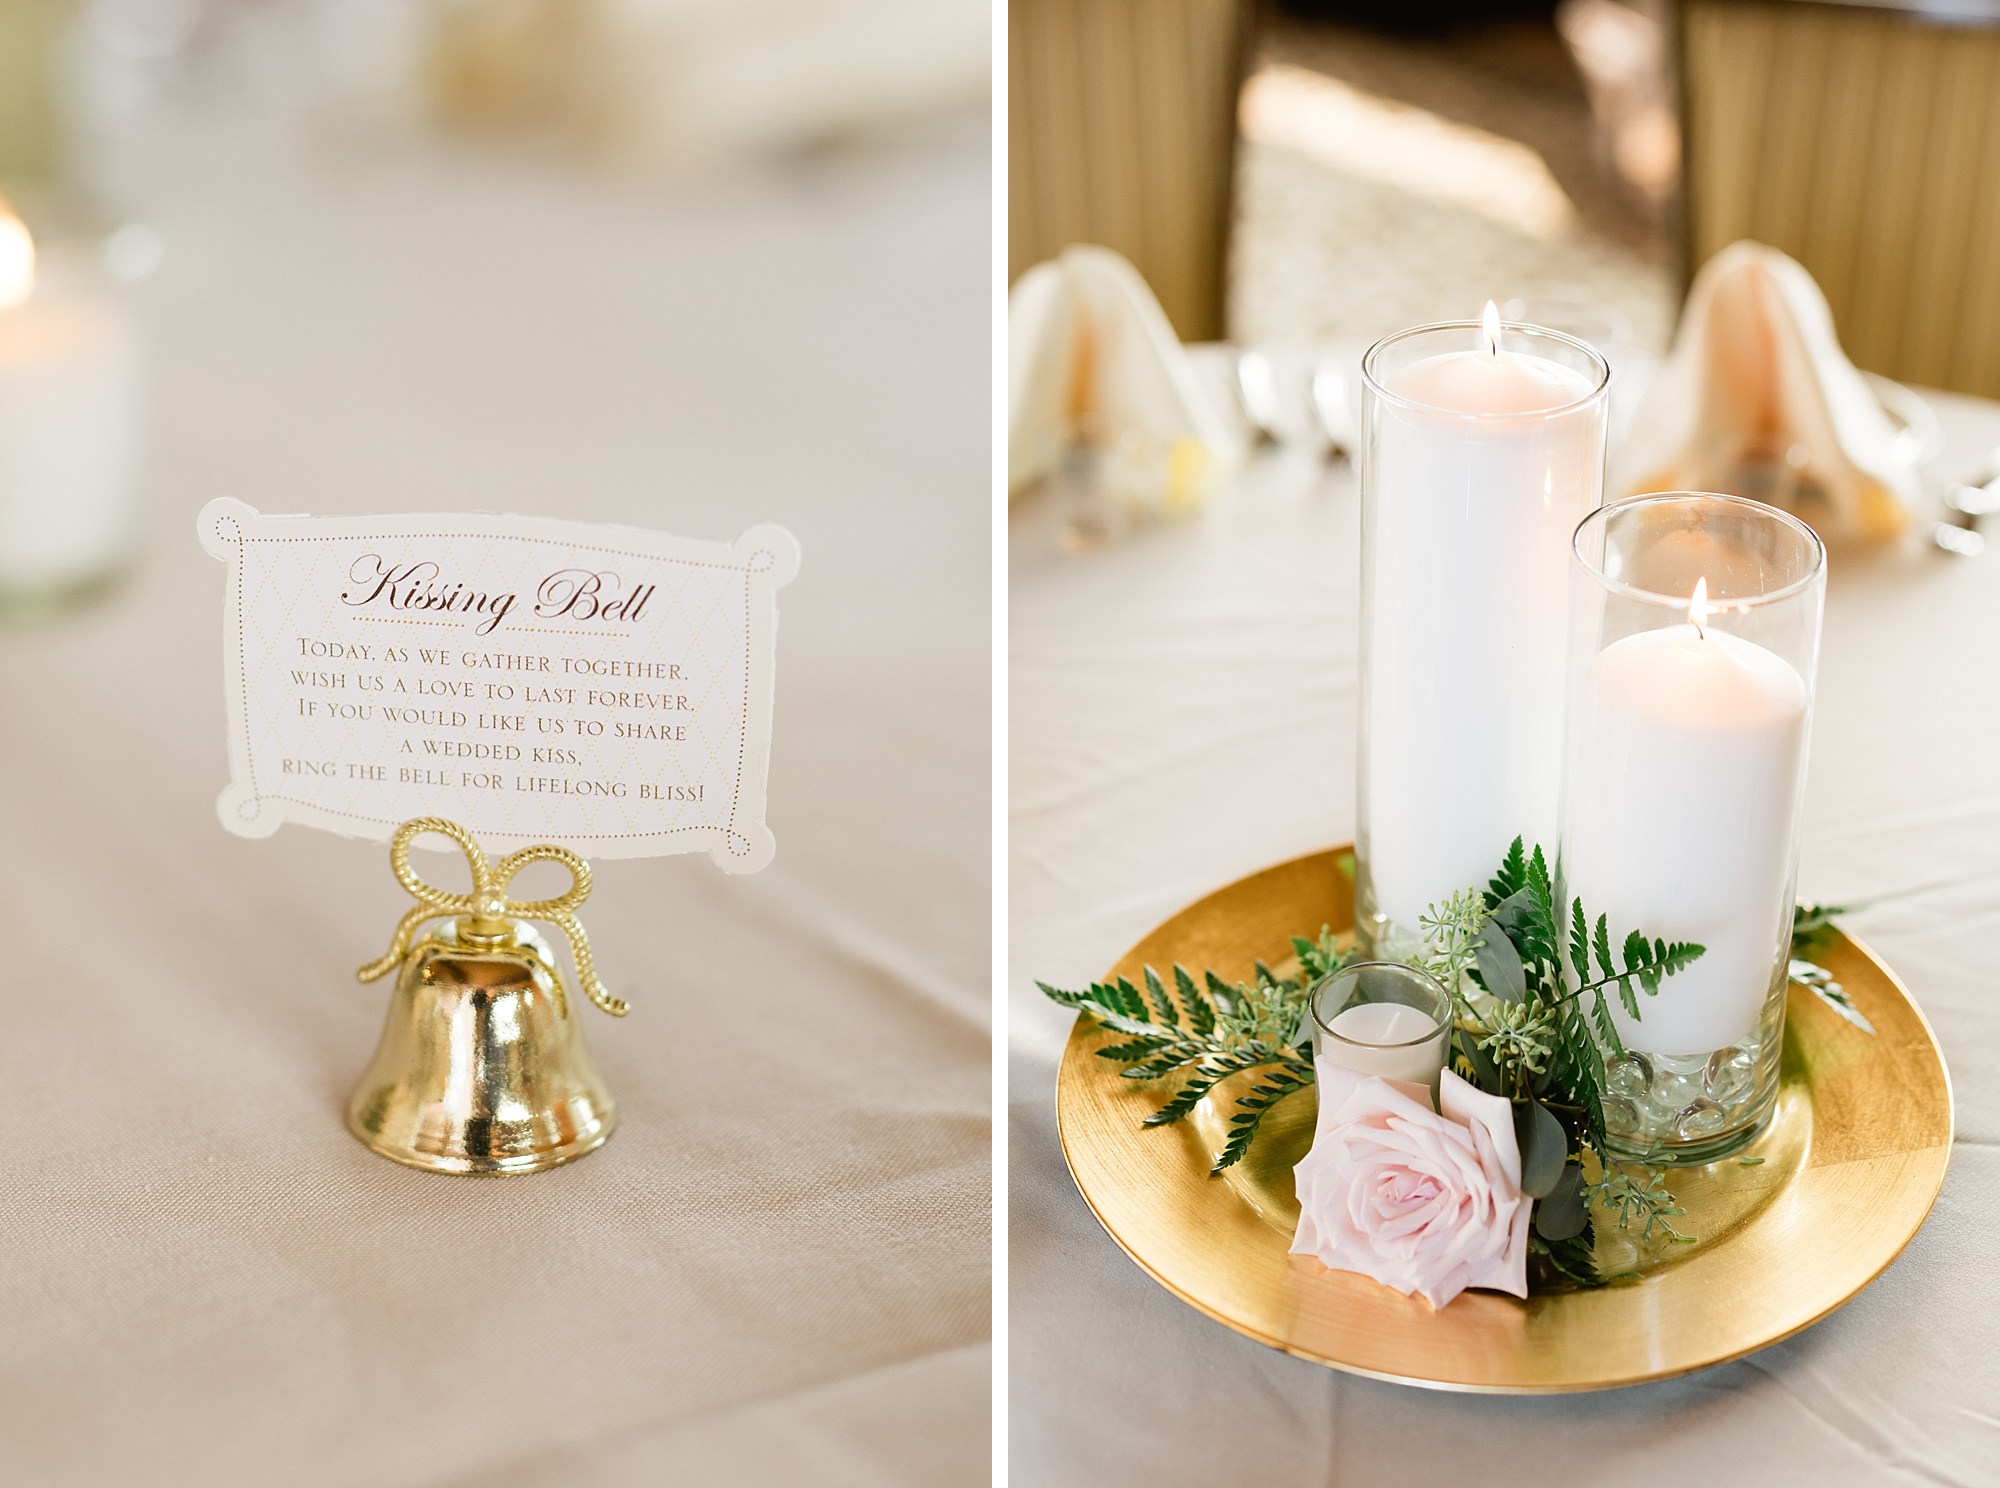 A romantic blush and gold summer wedding at Paint Creek Country Club in Lake Orion, Michigan by Breanne Rochelle Photography.